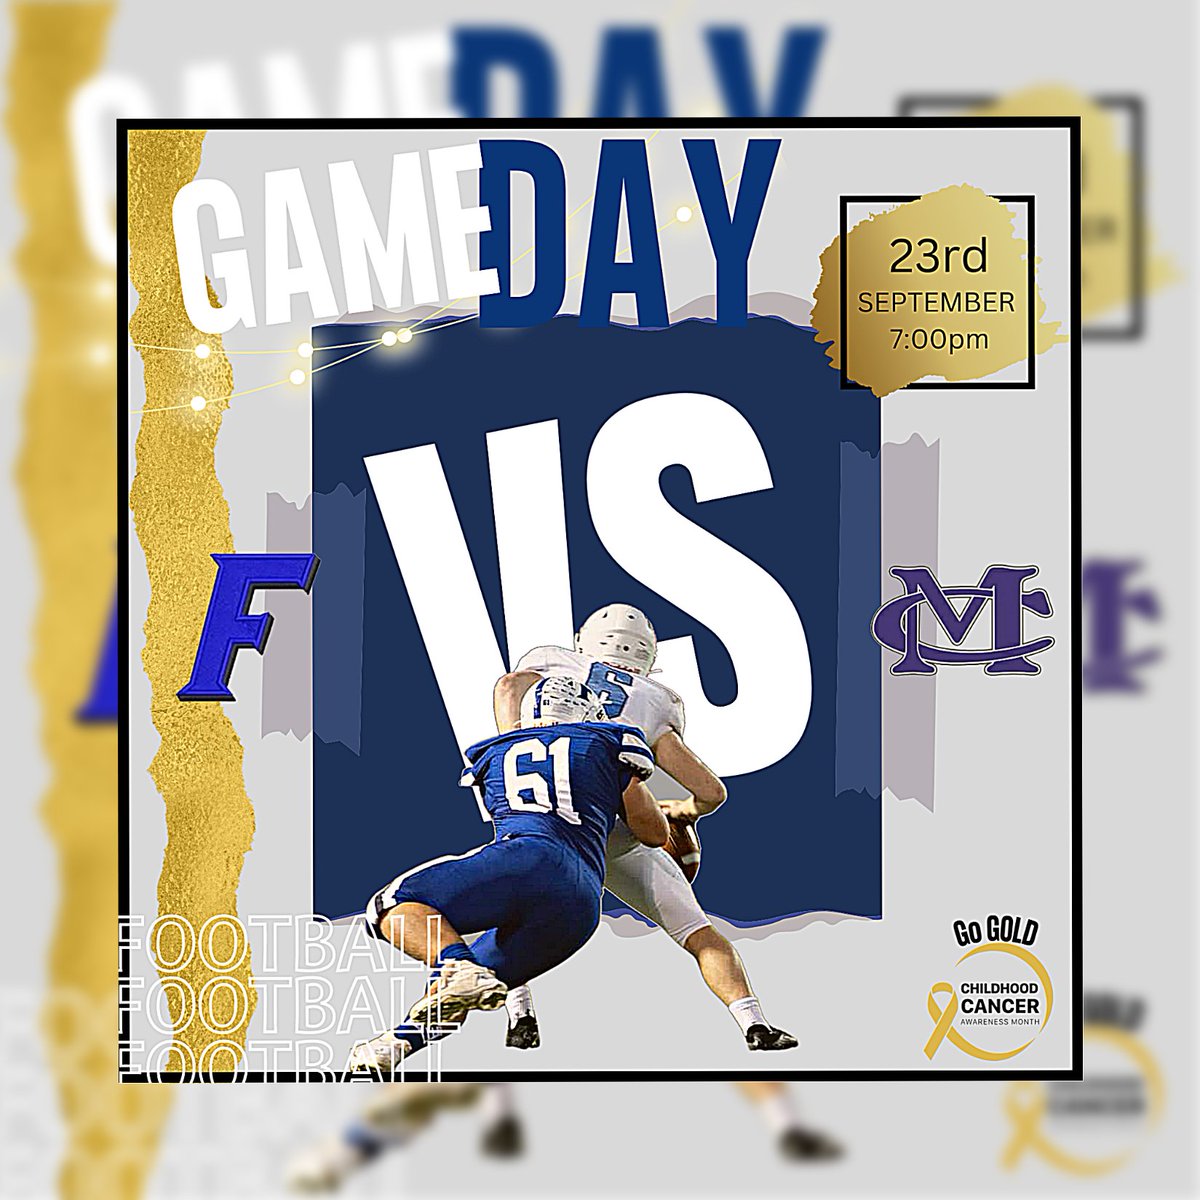 Welcome back to 'The Rock'. It’s Game Day Baby!! #gogold #letsdothis #itstimetoballfor911 #grinditout #fightforeachother #fightforforrestfootball #familyonthree #MicahStrong